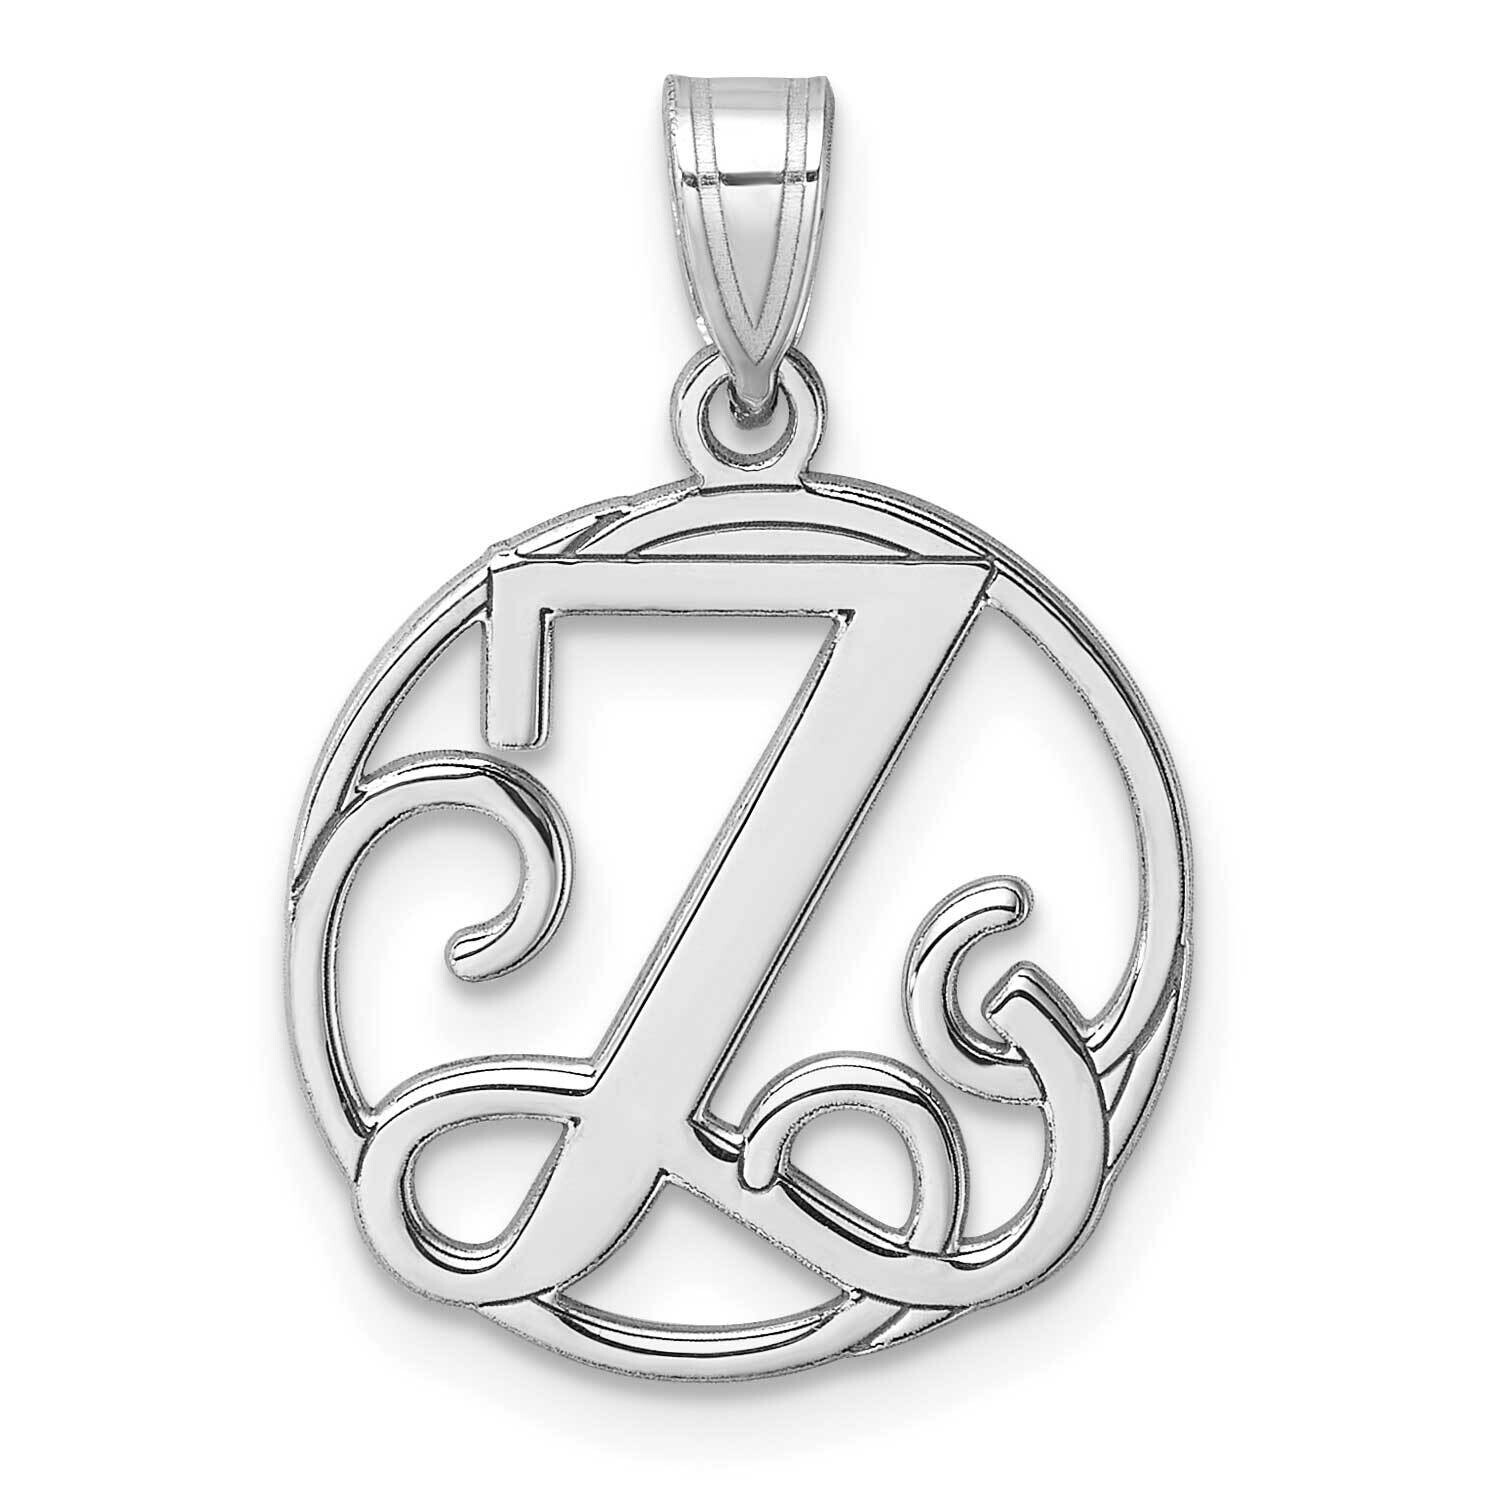 Small Fancy Script Letter Z Initial Pendant Sterling Silver Rhodium-Plated QC11257Z